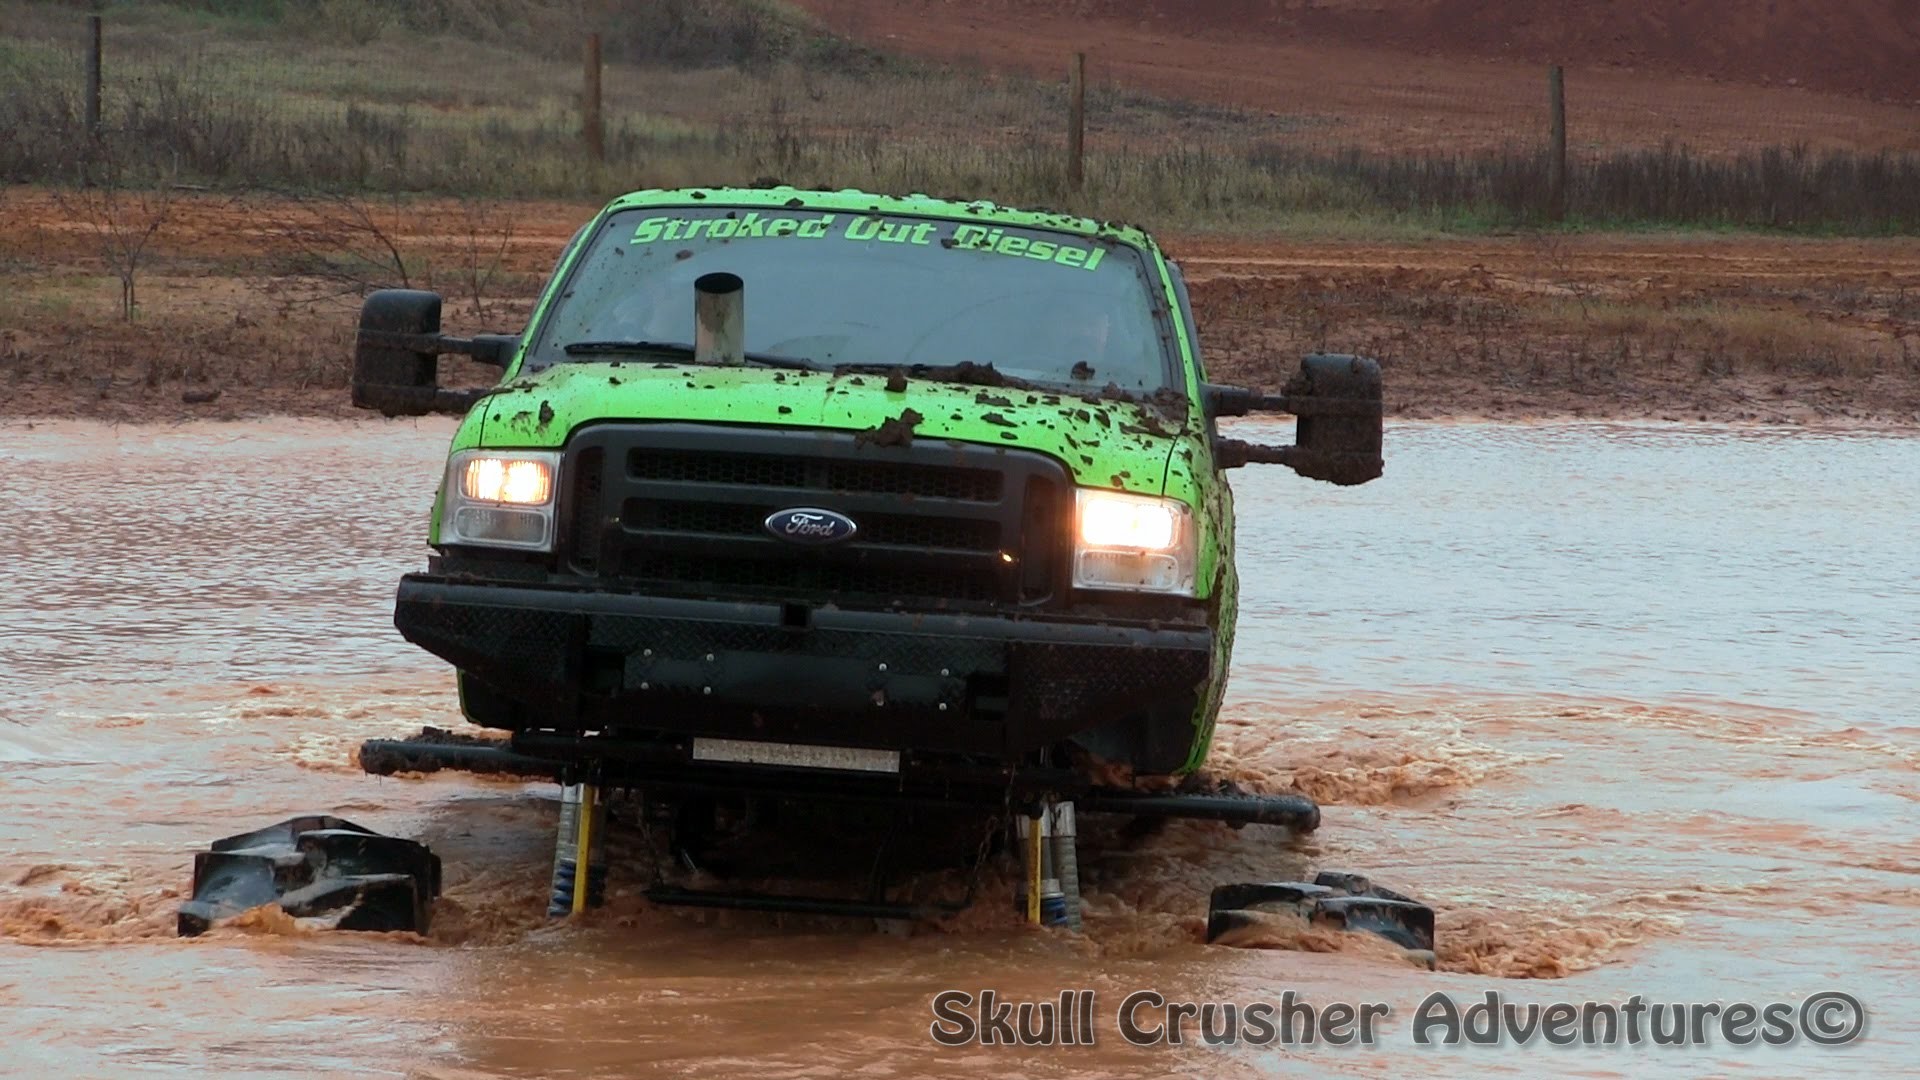 1920x1080 We Bet Your Lifted Truck Couldn't Handle Water Like This…